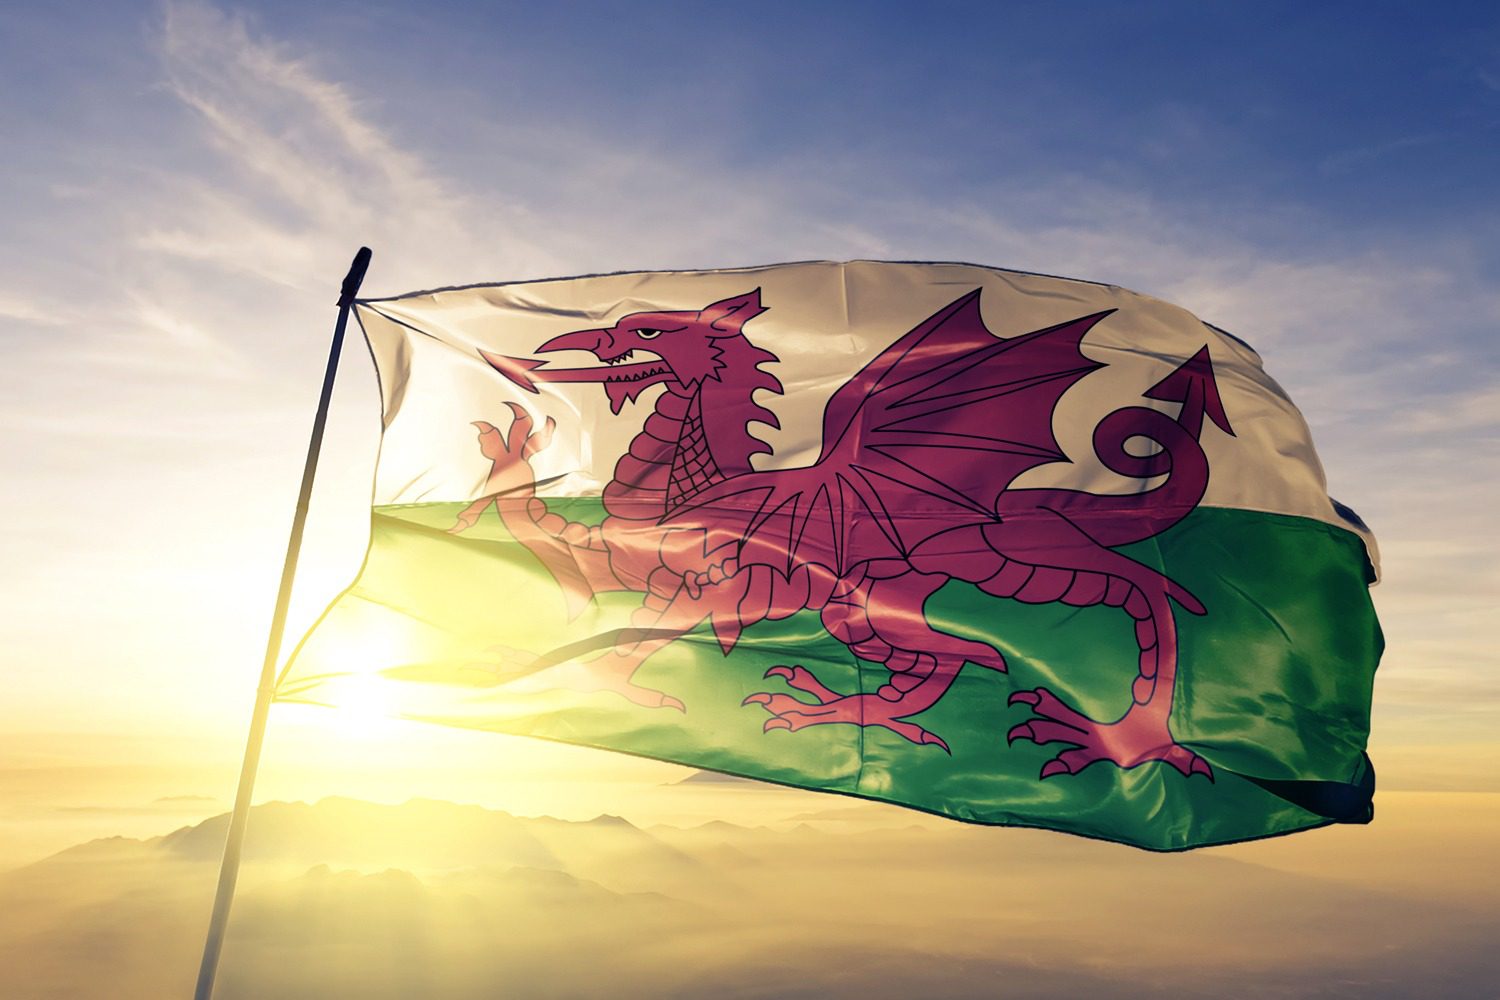 Welsh flag - green and white background with a big red dragon on the front - waving in front of a sunset.